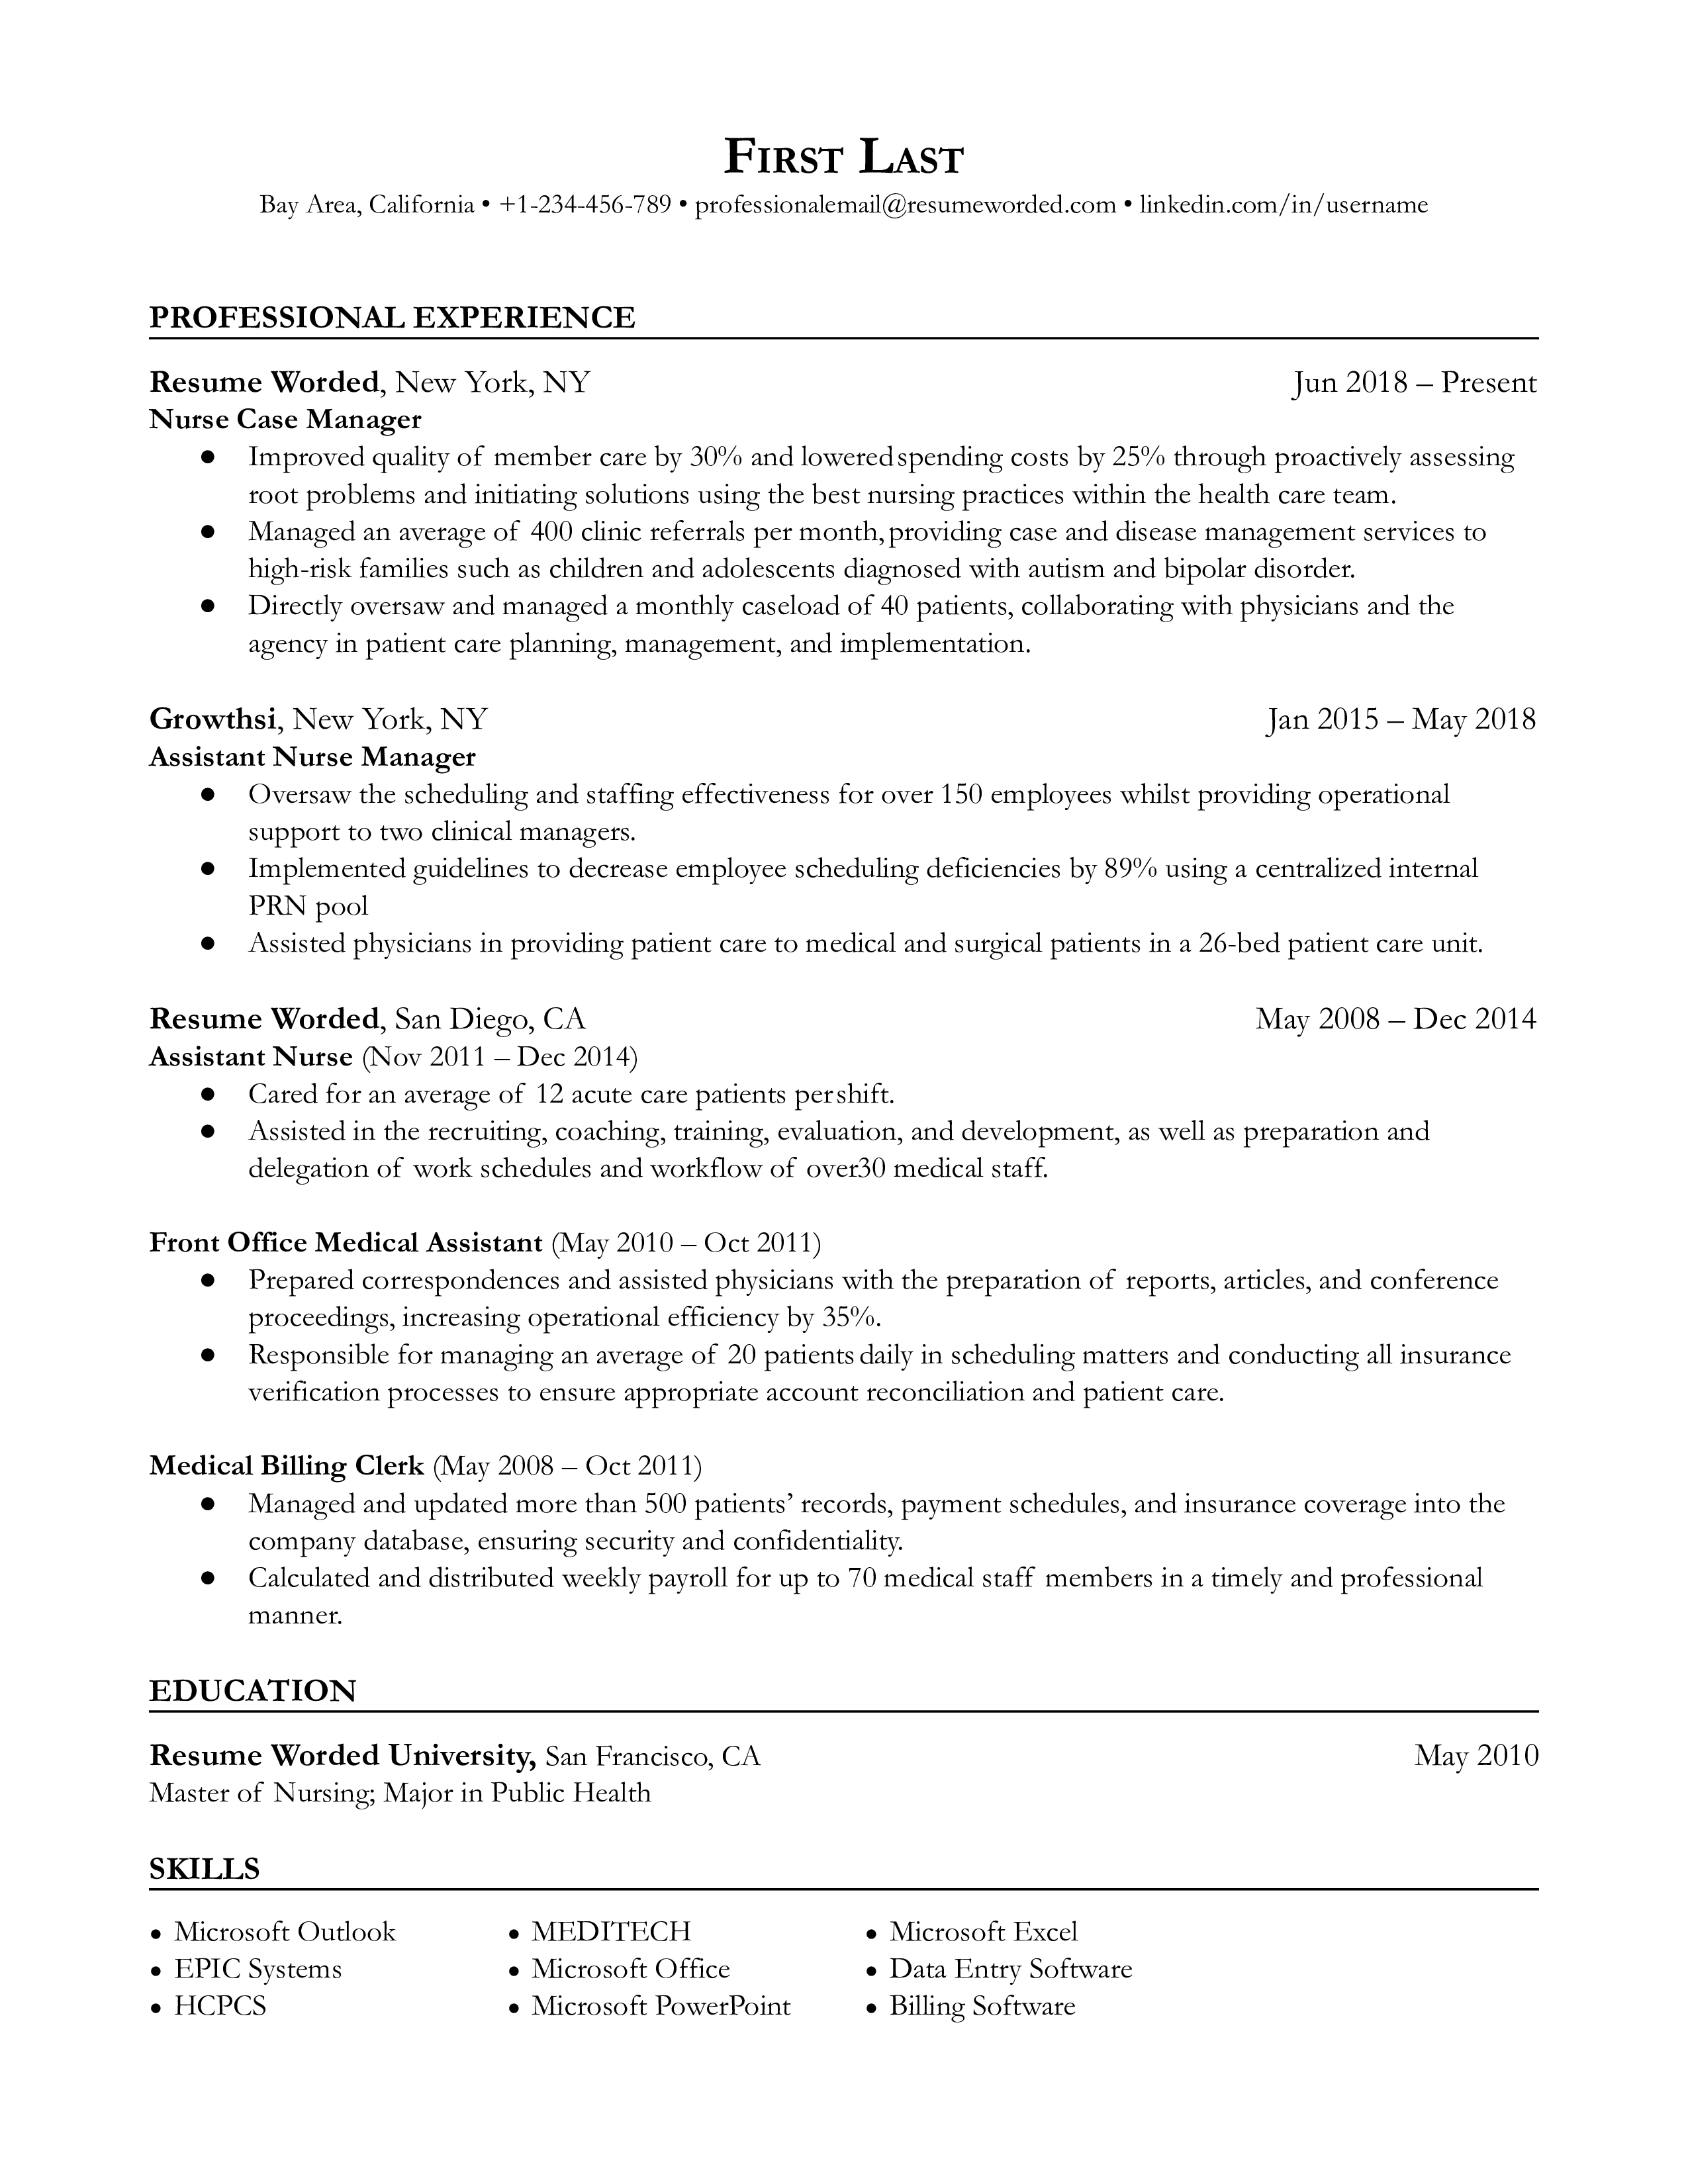 Nurse case manager resume template example with numbers and metrics and listing appropriate hard skills